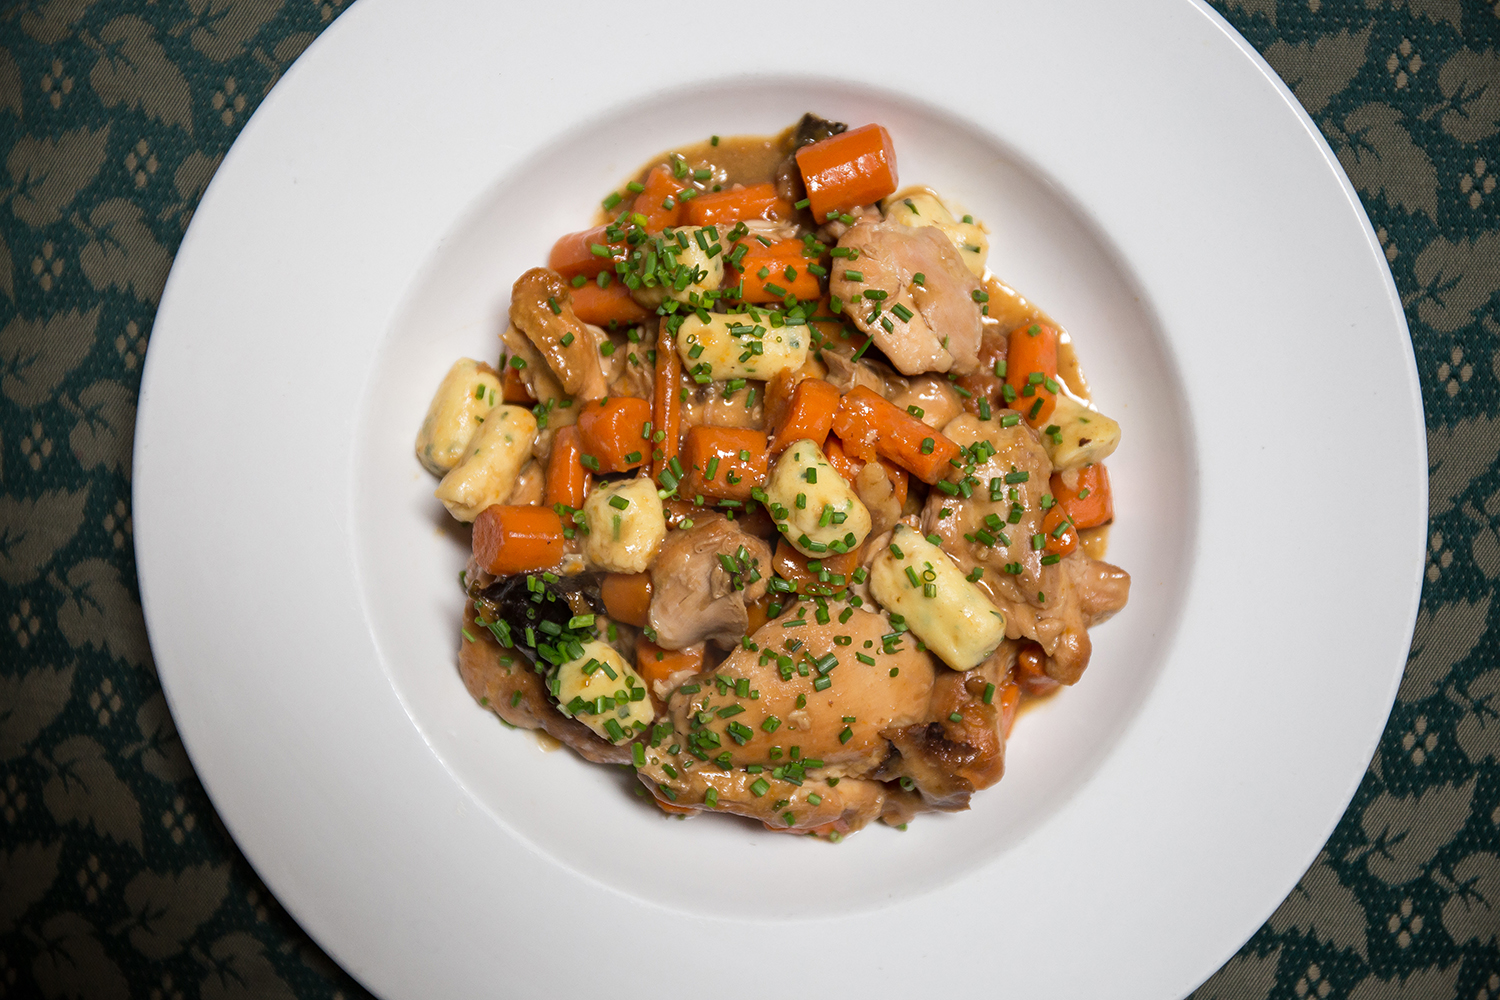 A bowl of Jewish stew with chicken and chives sprinkled on top.